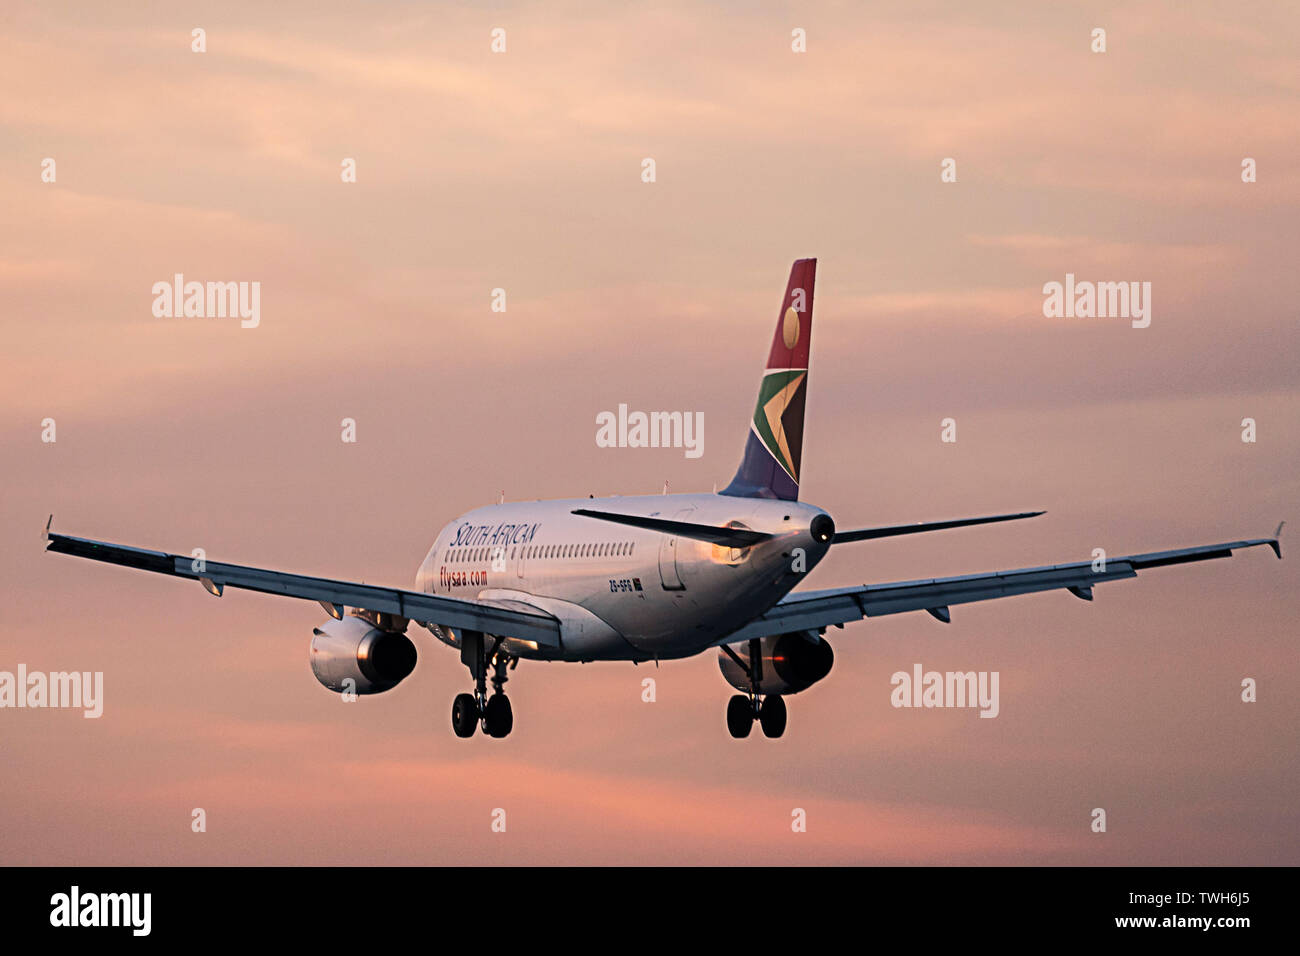 A close up view of a South African Airways passenger aeroplane (airplane) in the process of landing at the Cape Town International airport. Stock Photo